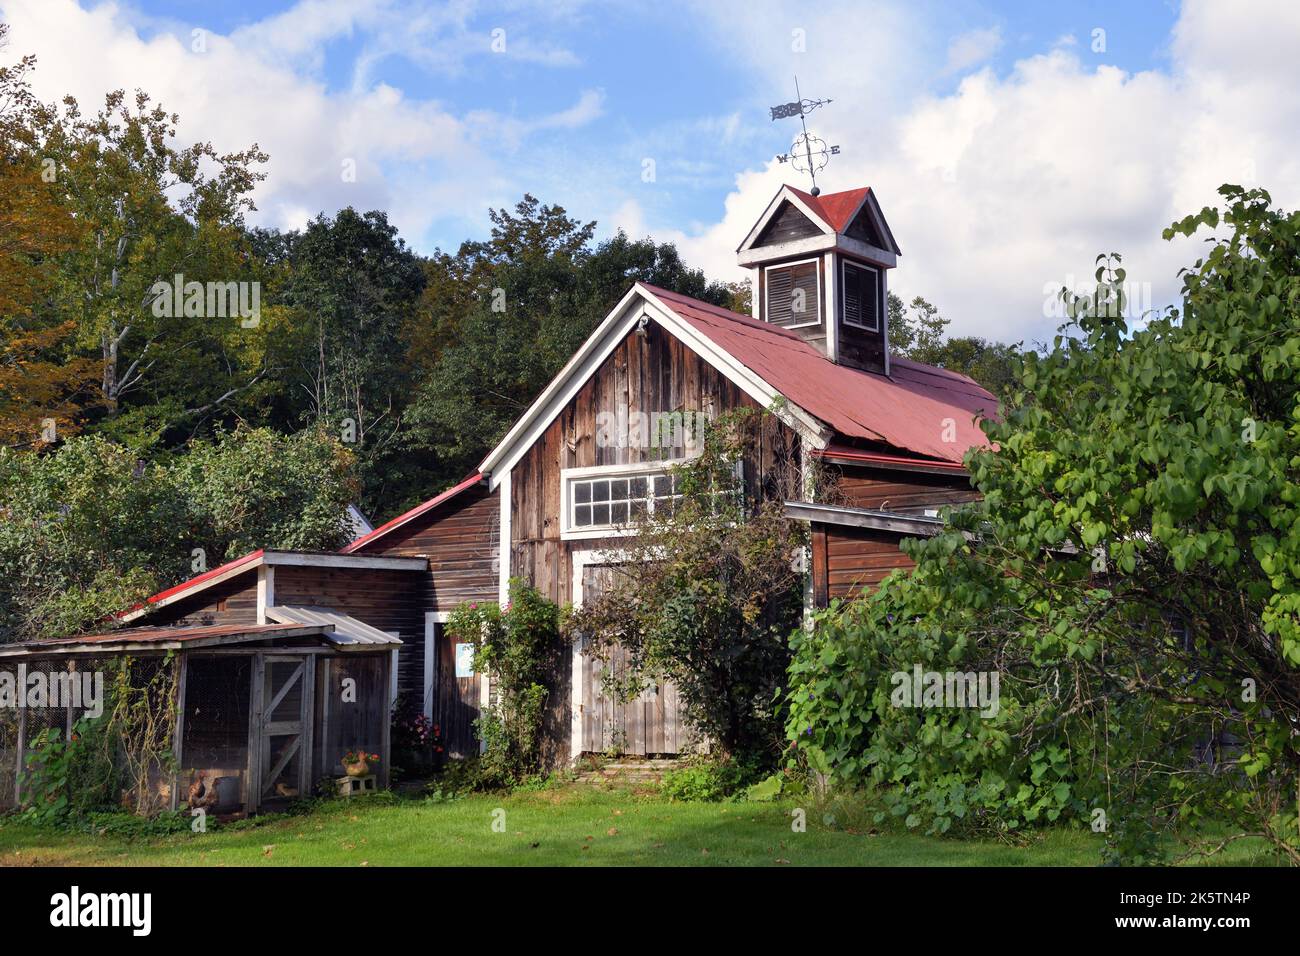 Lower Bartonsville, Vermont, USA. A rustic shed/storage barn complete with a crooked weather vane atop a roof cupola. Stock Photo